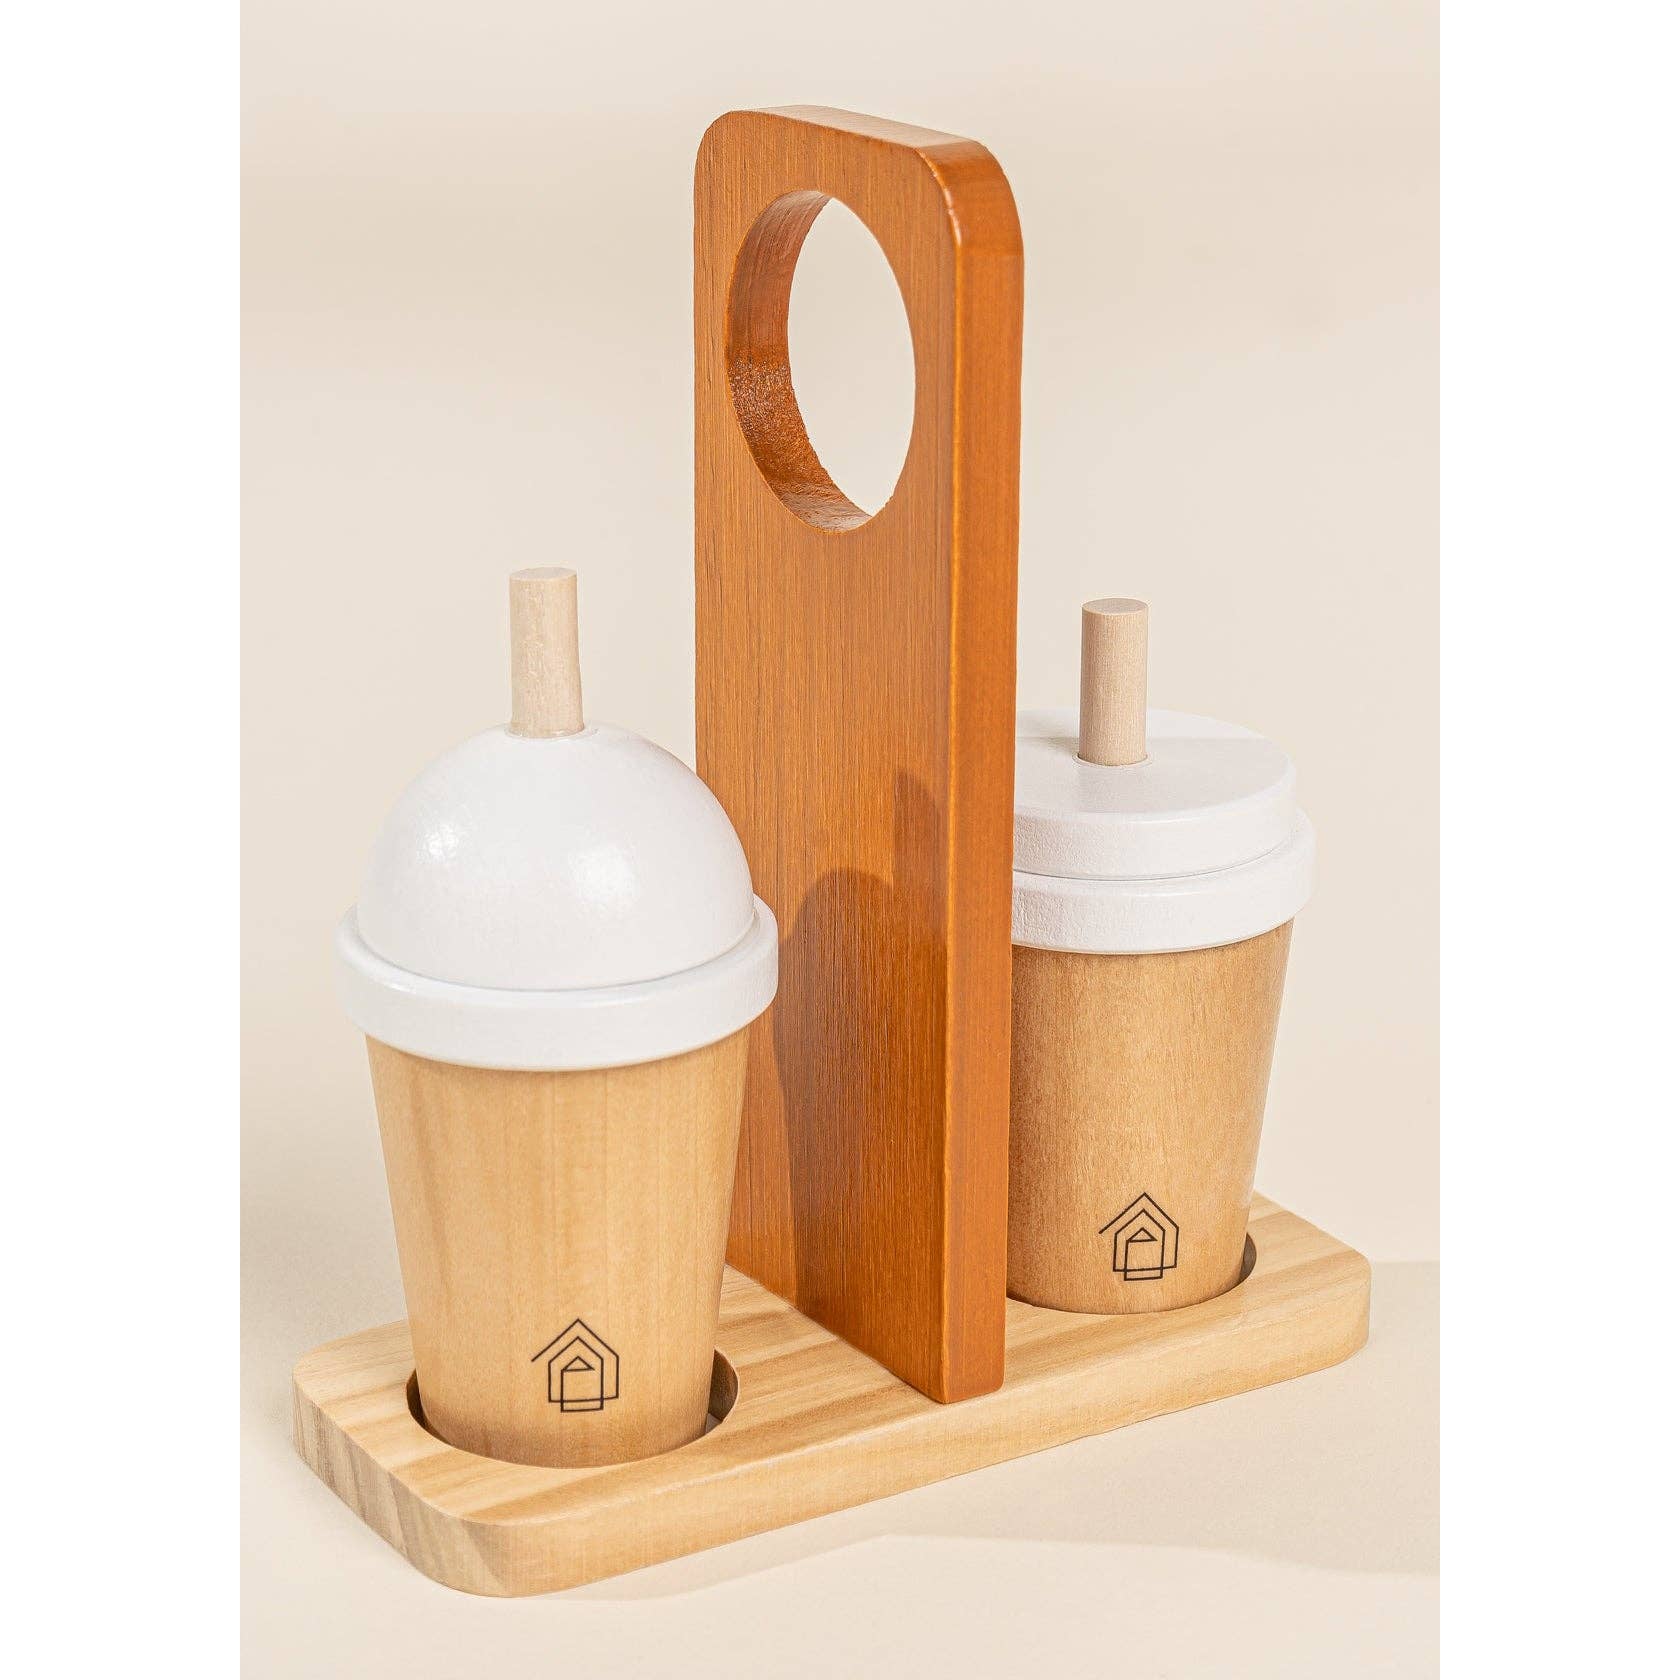 Wooden Coffee Maker Play Set